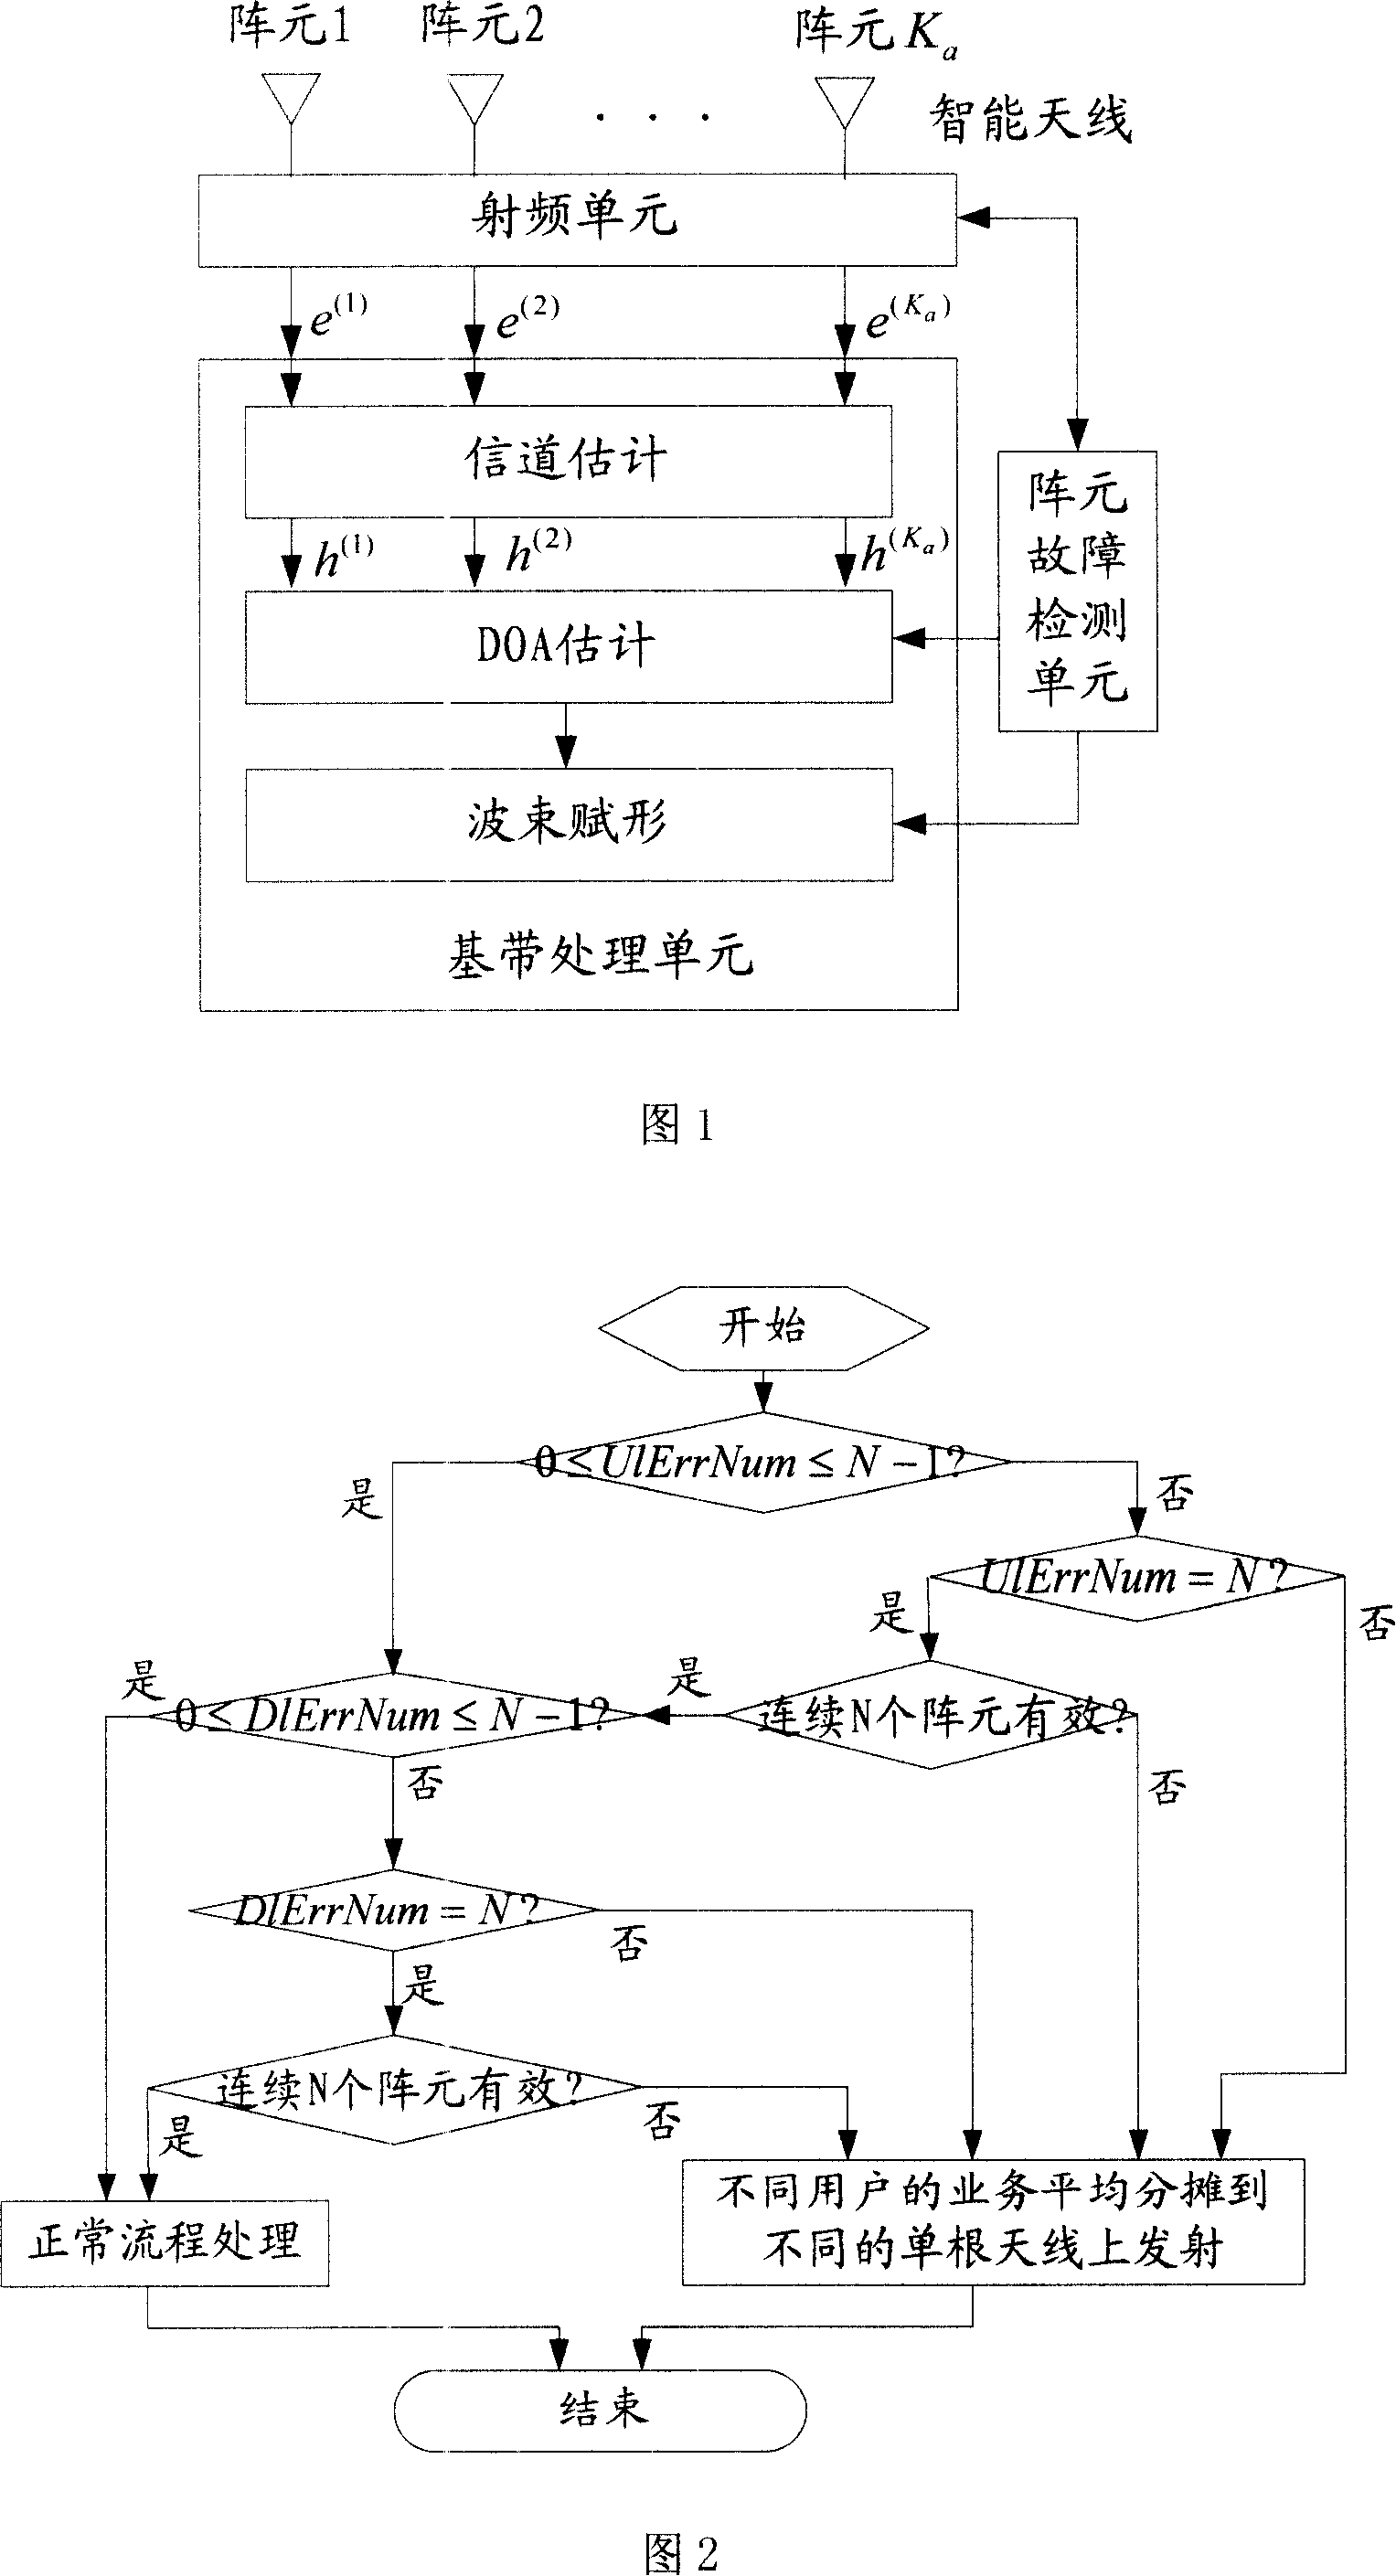 Compensation method for intelligent antenna system after failure of part of channels